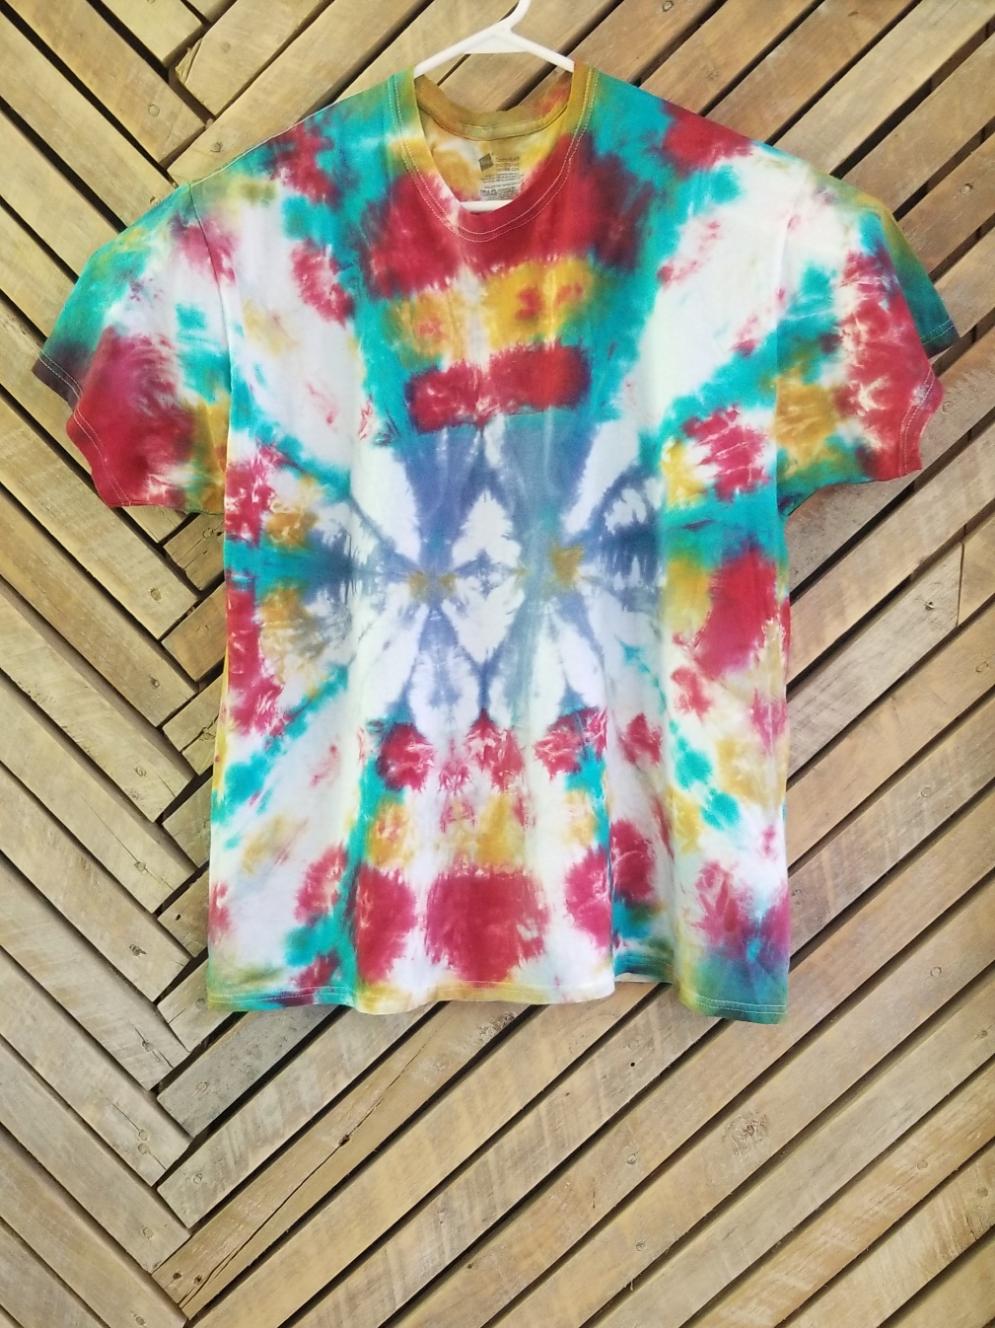 Tie Dye T-Shirt-Adult XXL - Willowisp Apothecary 